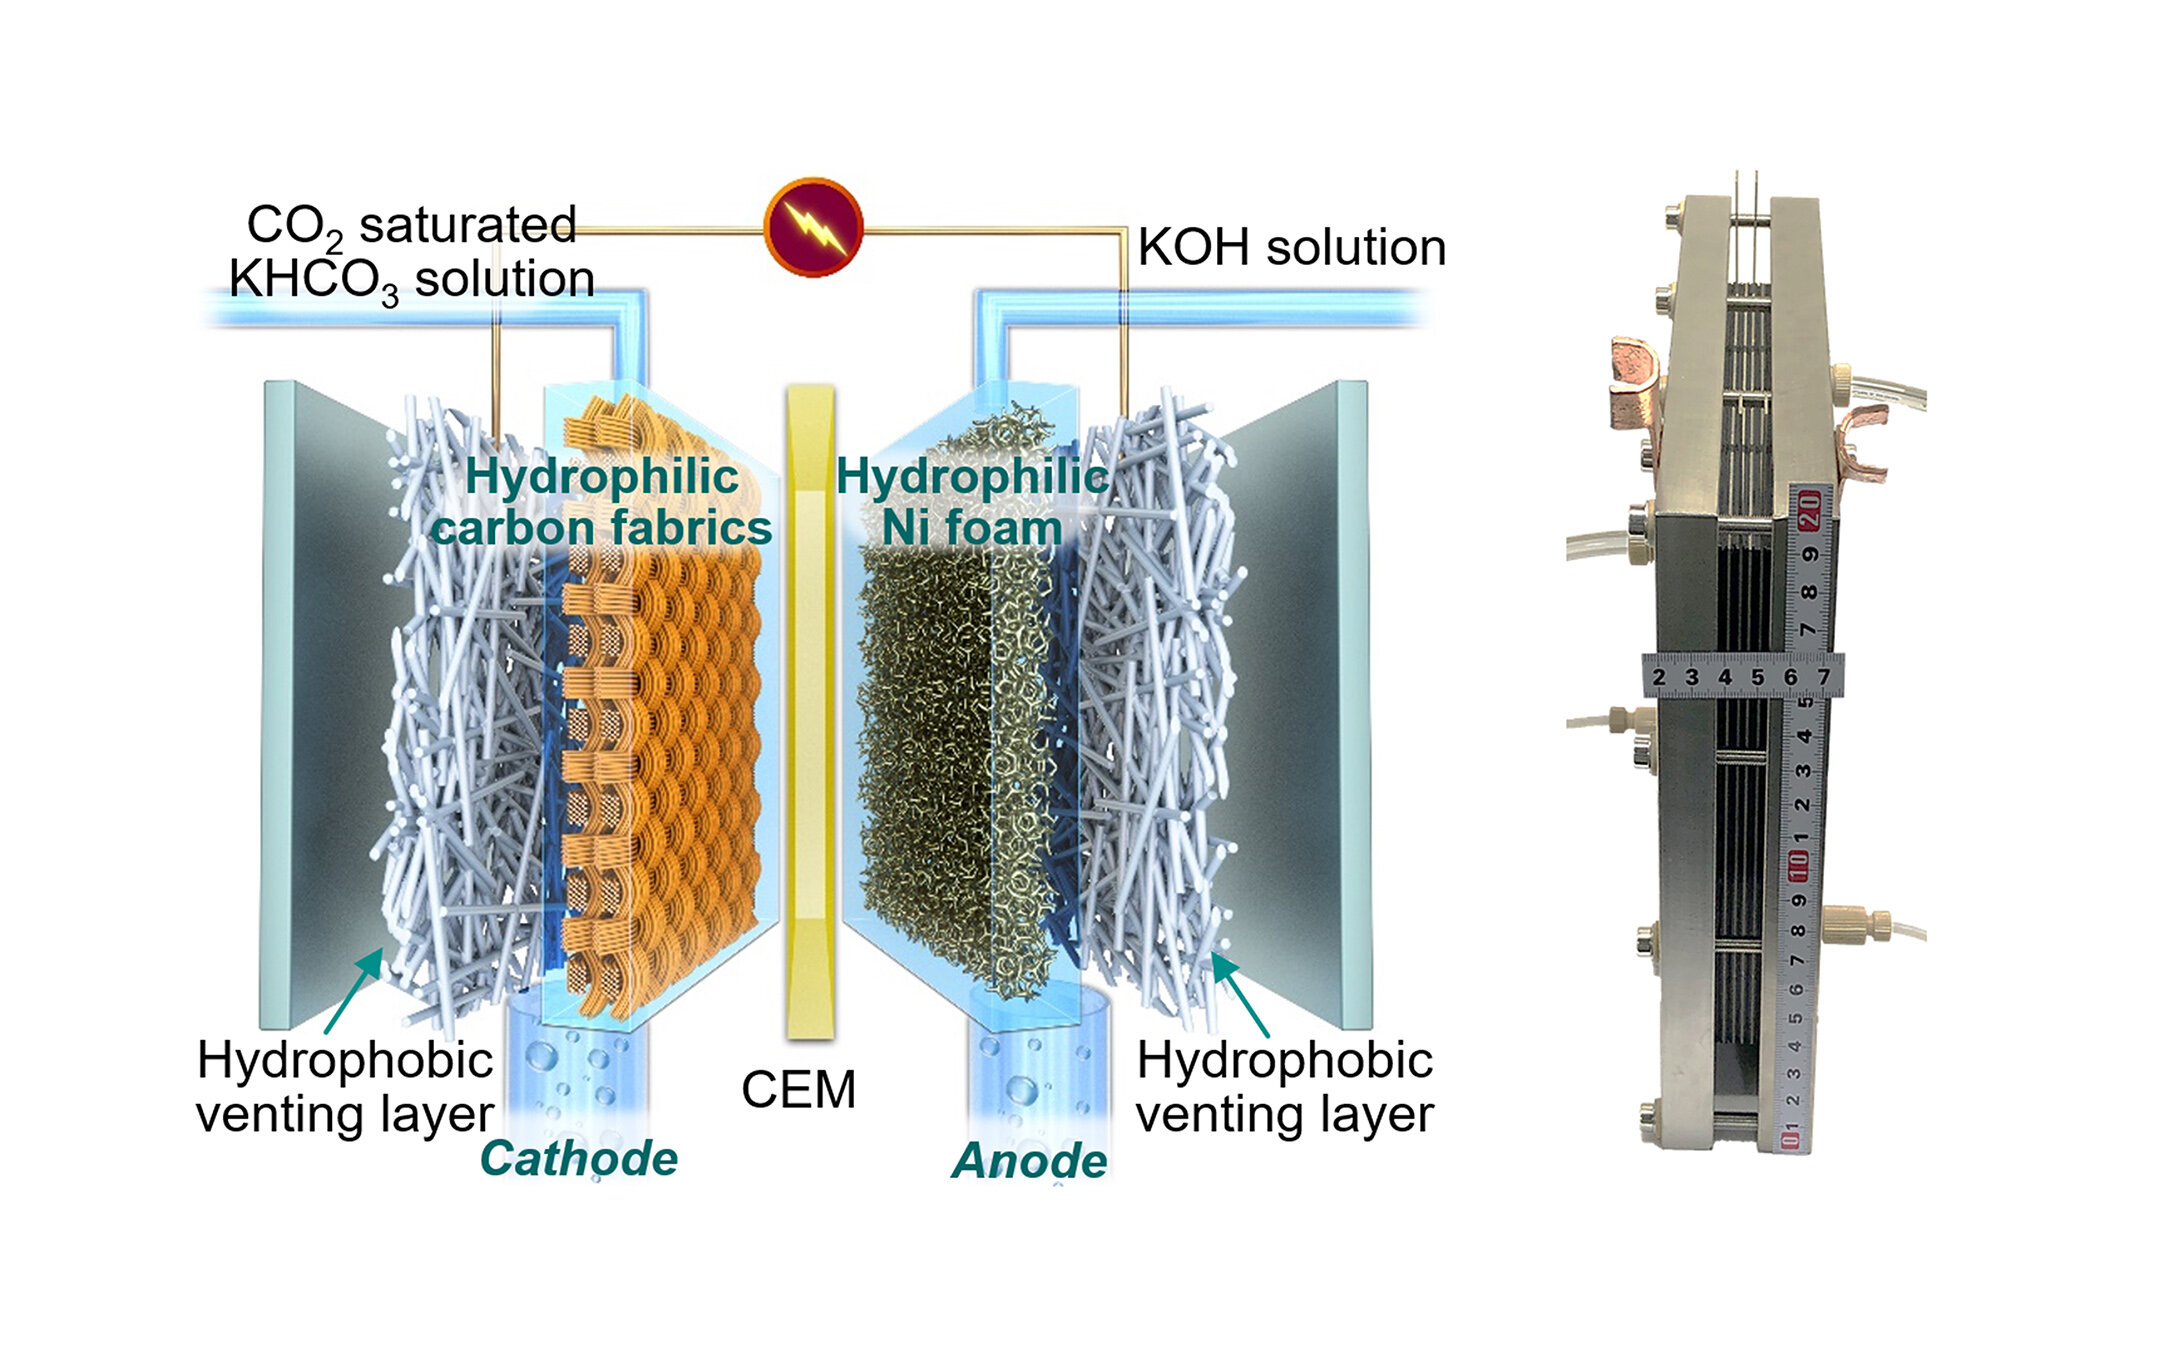 On-site reactors could affordably turn carbon dioxide into valuable chemicals